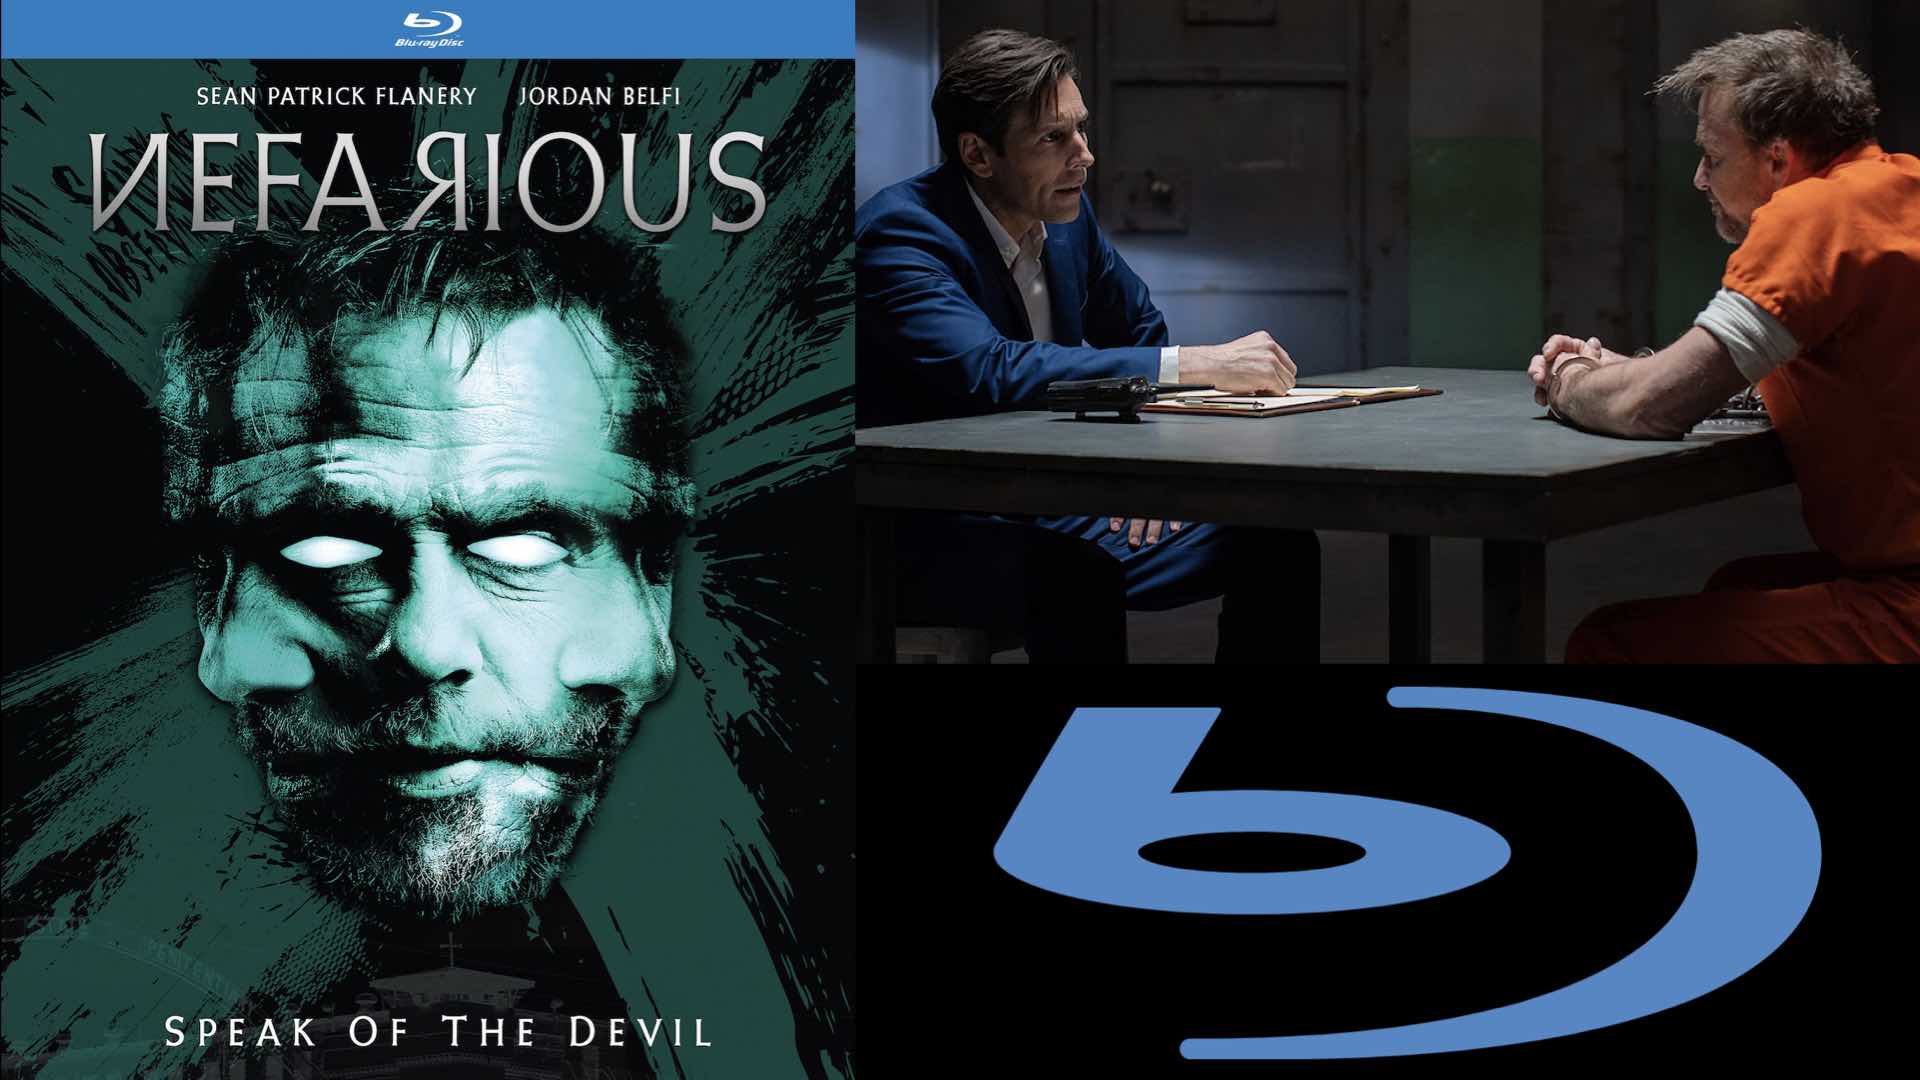 Supernatural Thriller 'Nefarious' Hits Bluray and DVD in August